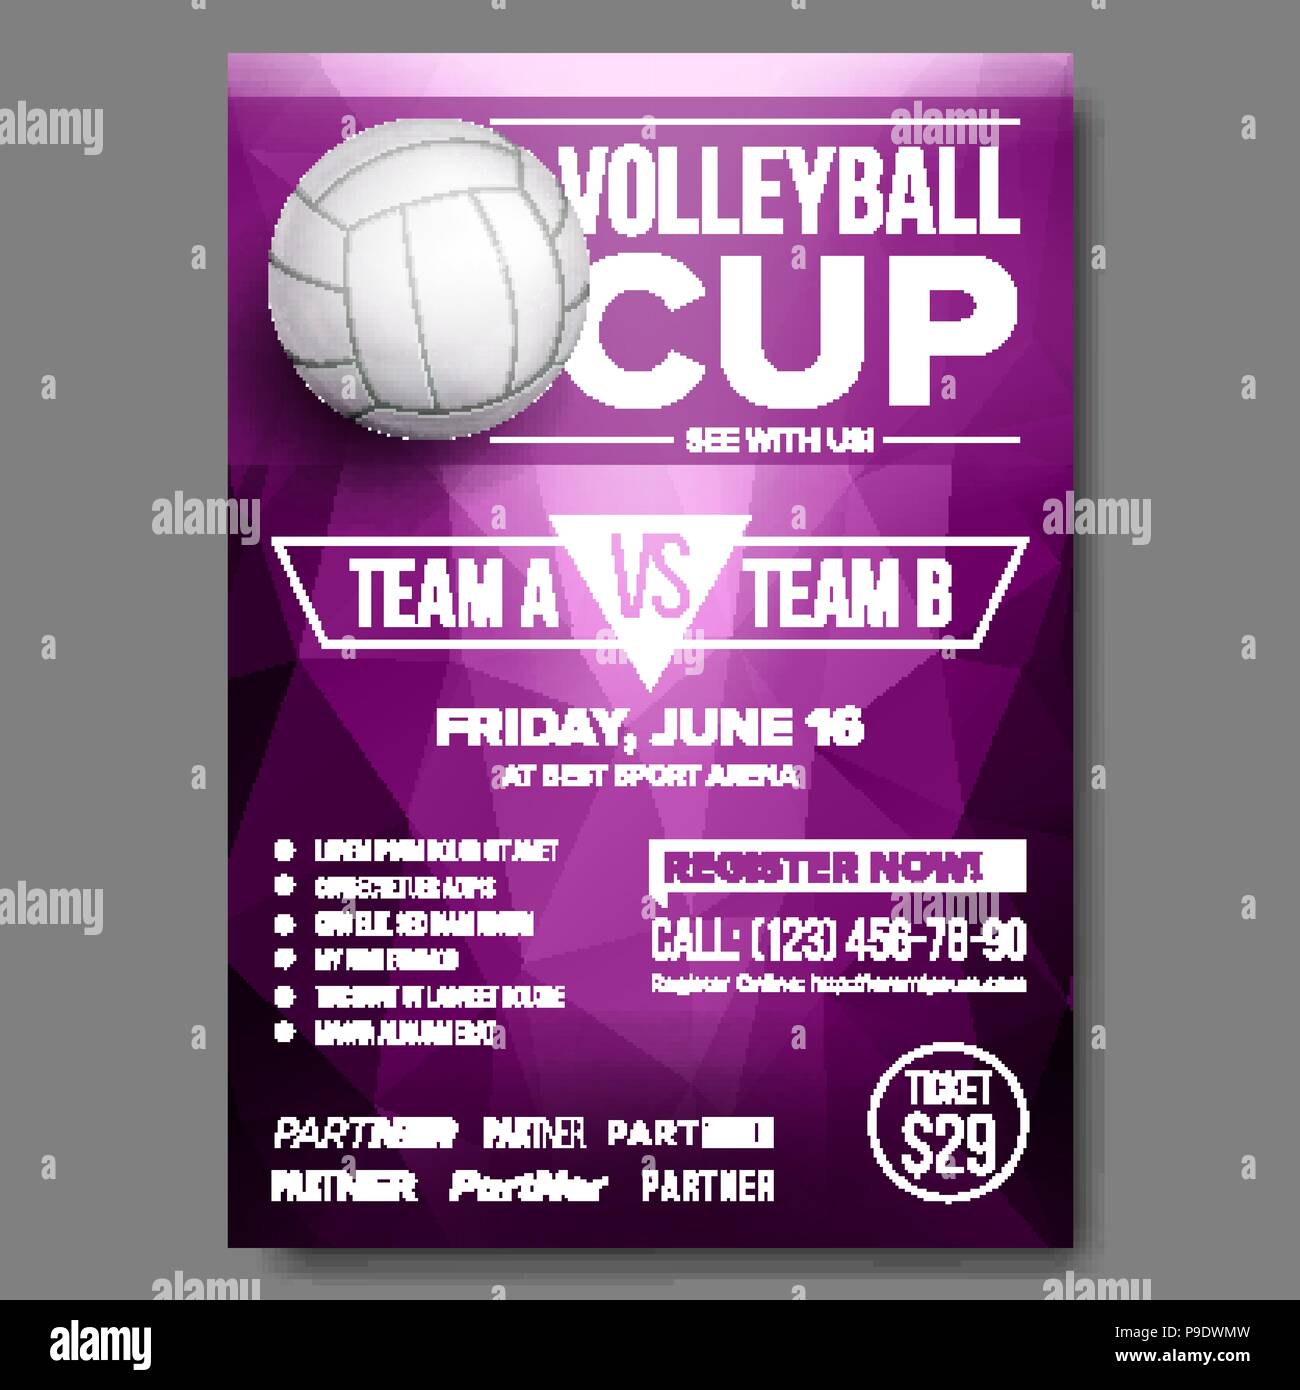 Volleyball Poster Vector. Design For Sport Cafe, Pub, Bar Promotion. Beach. Volleyball Ball. Modern Tournament. Championship Label A4 Size. Volley. Game Banner Template Advertising Illustration Stock Vector